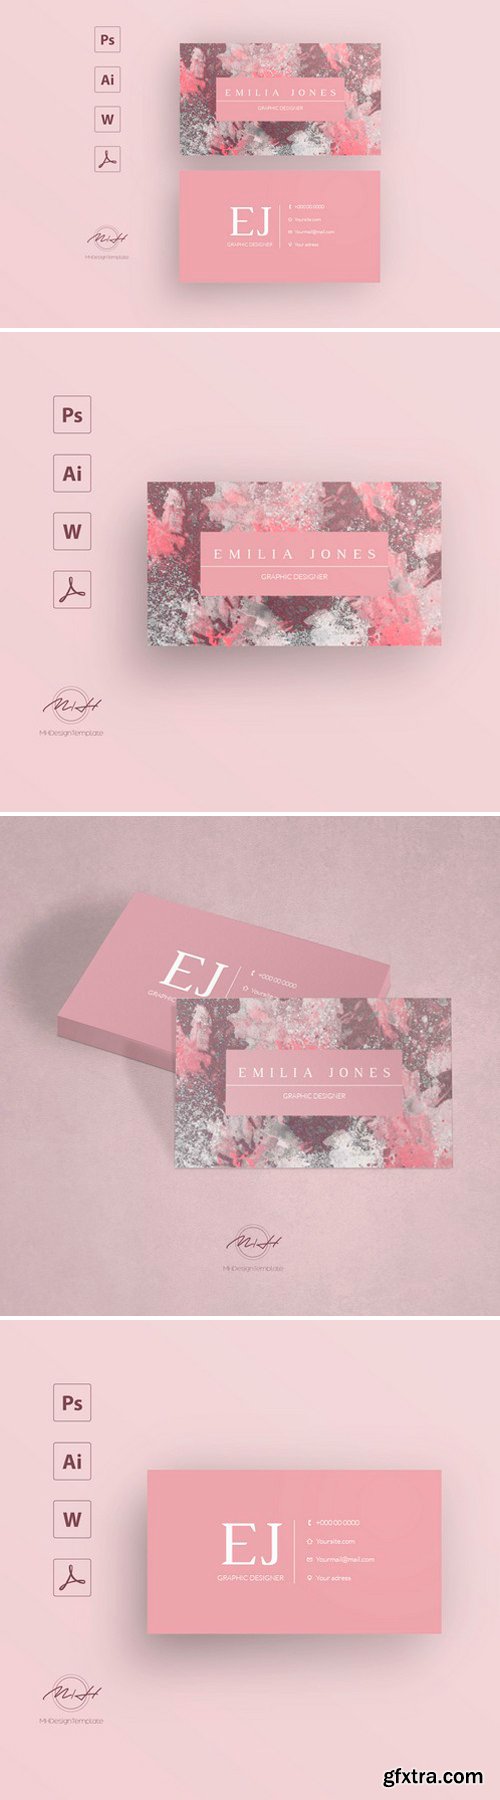 CM - Marble business card template 2543756